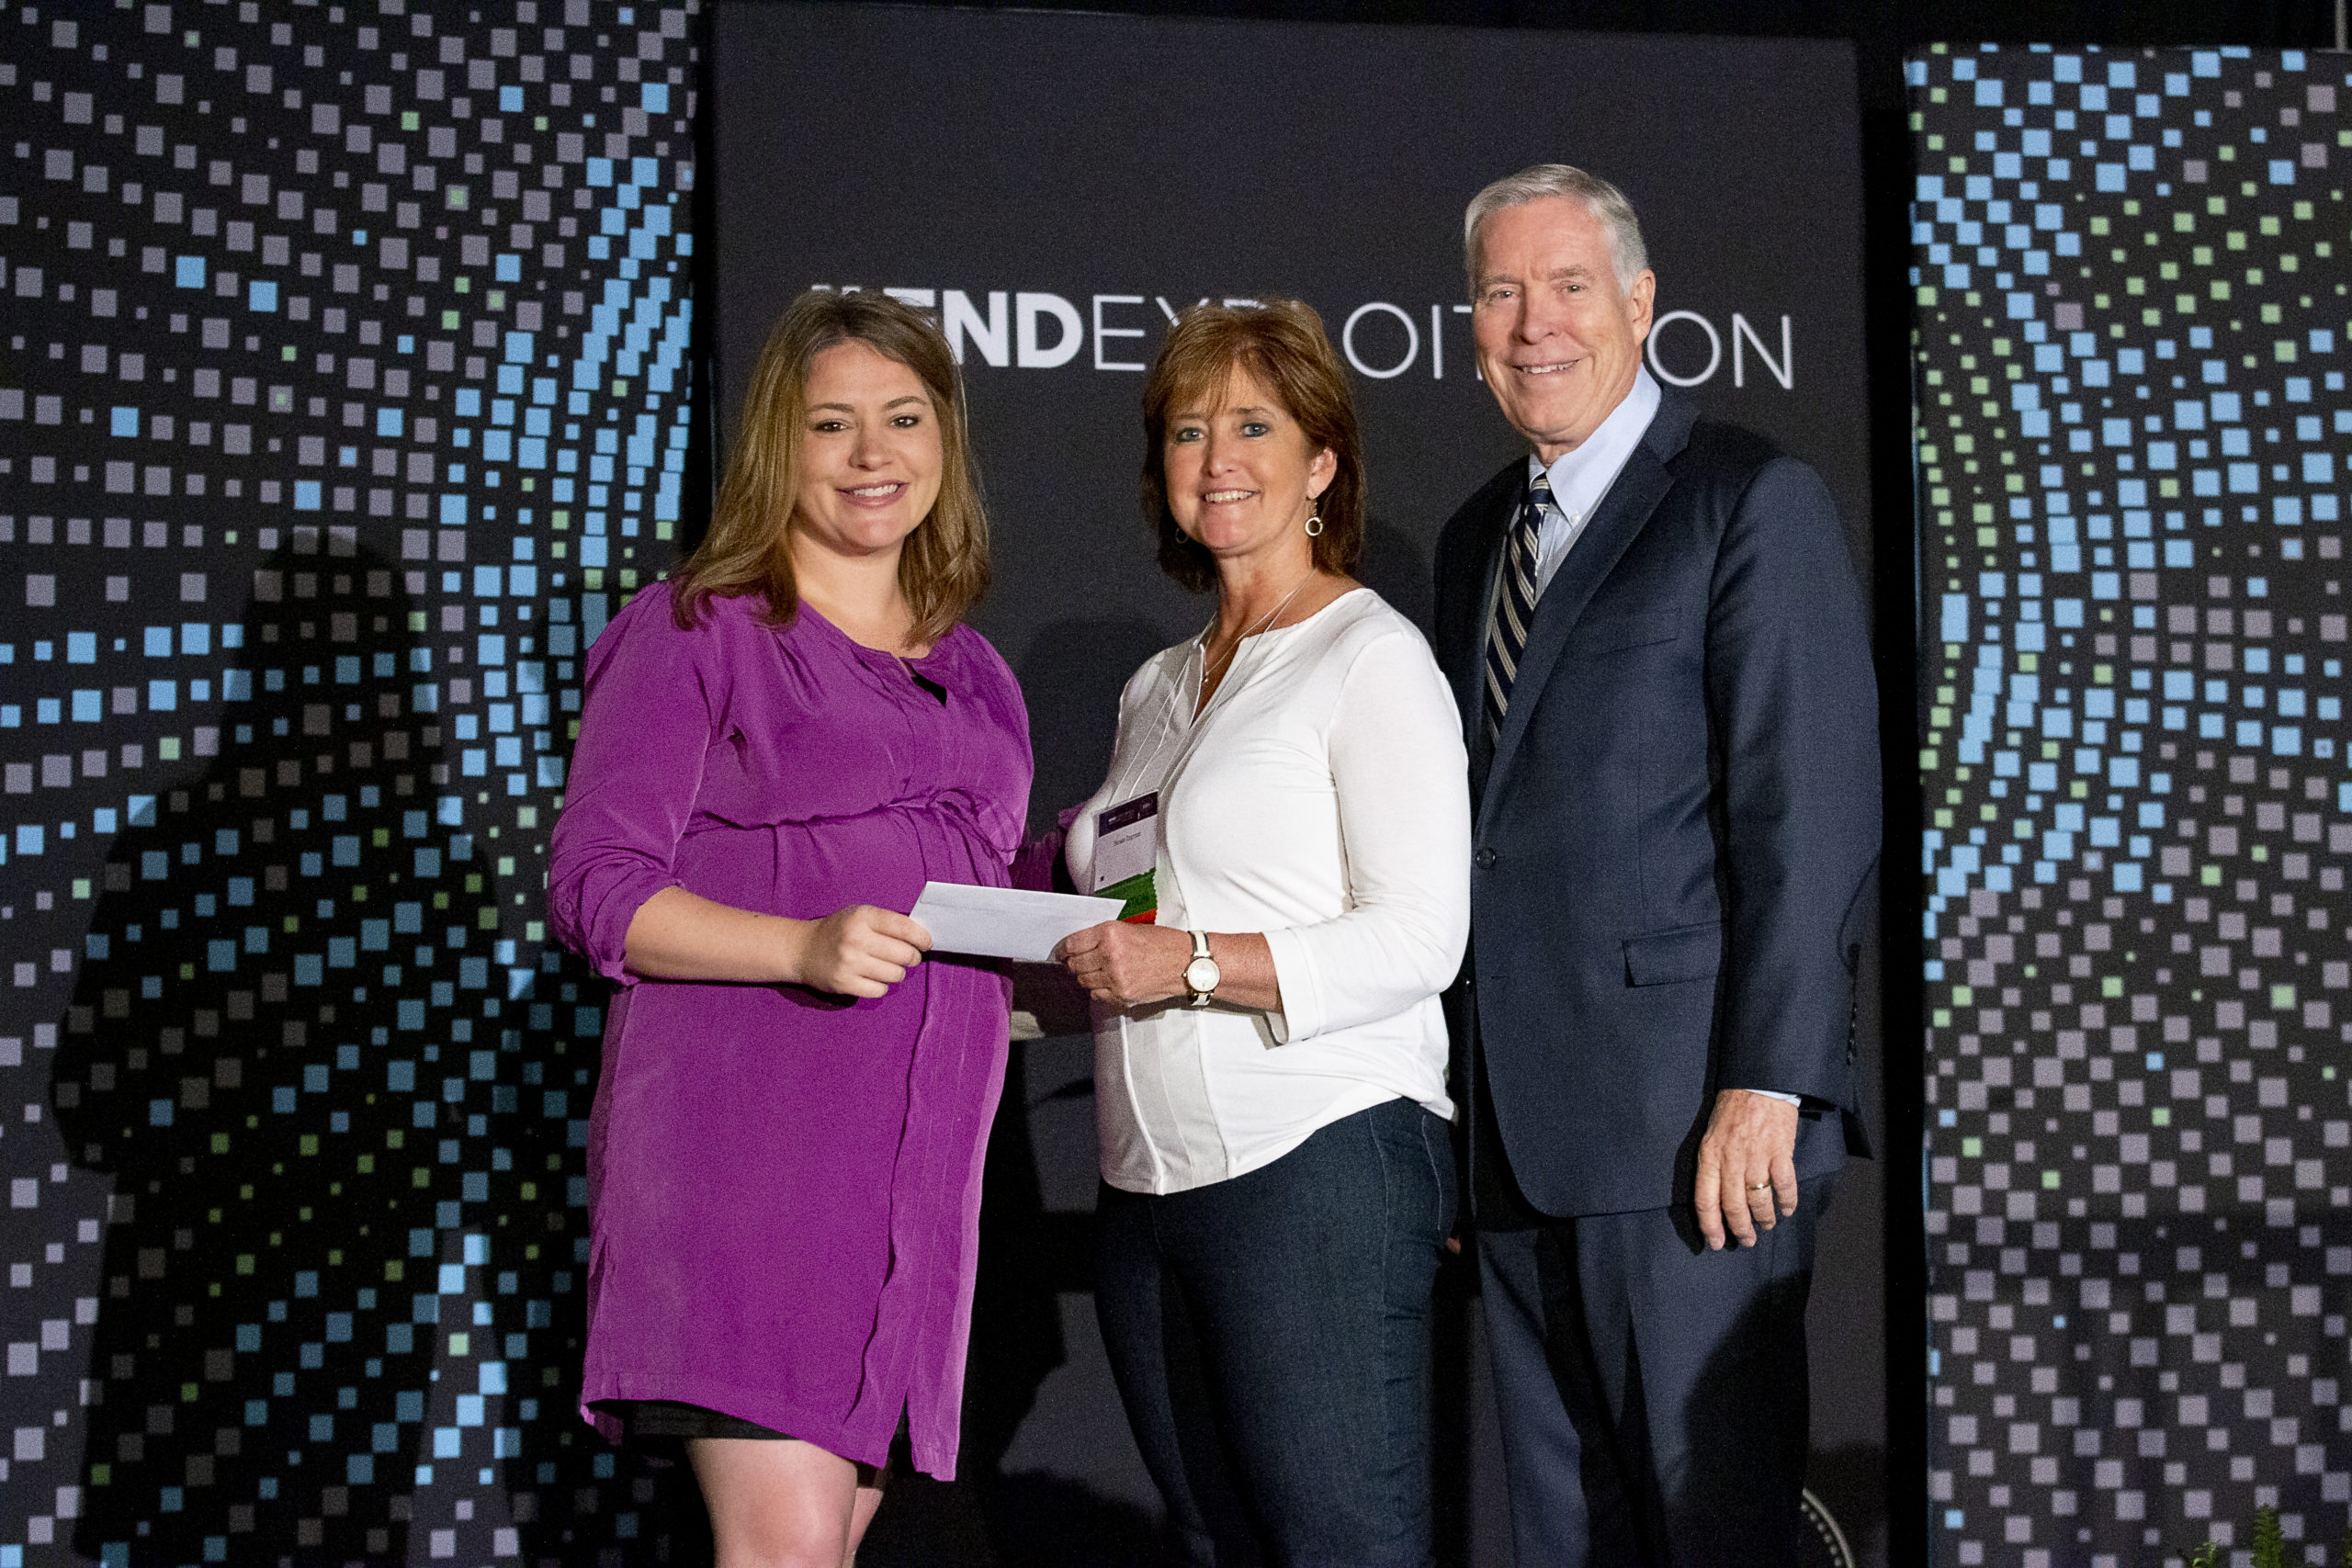 Walk Her Home Founder & President presenting the donation to the National Center on Sexual Exploitation at the 2019 Coalition to End Sexual Exploitation Global Summit. 